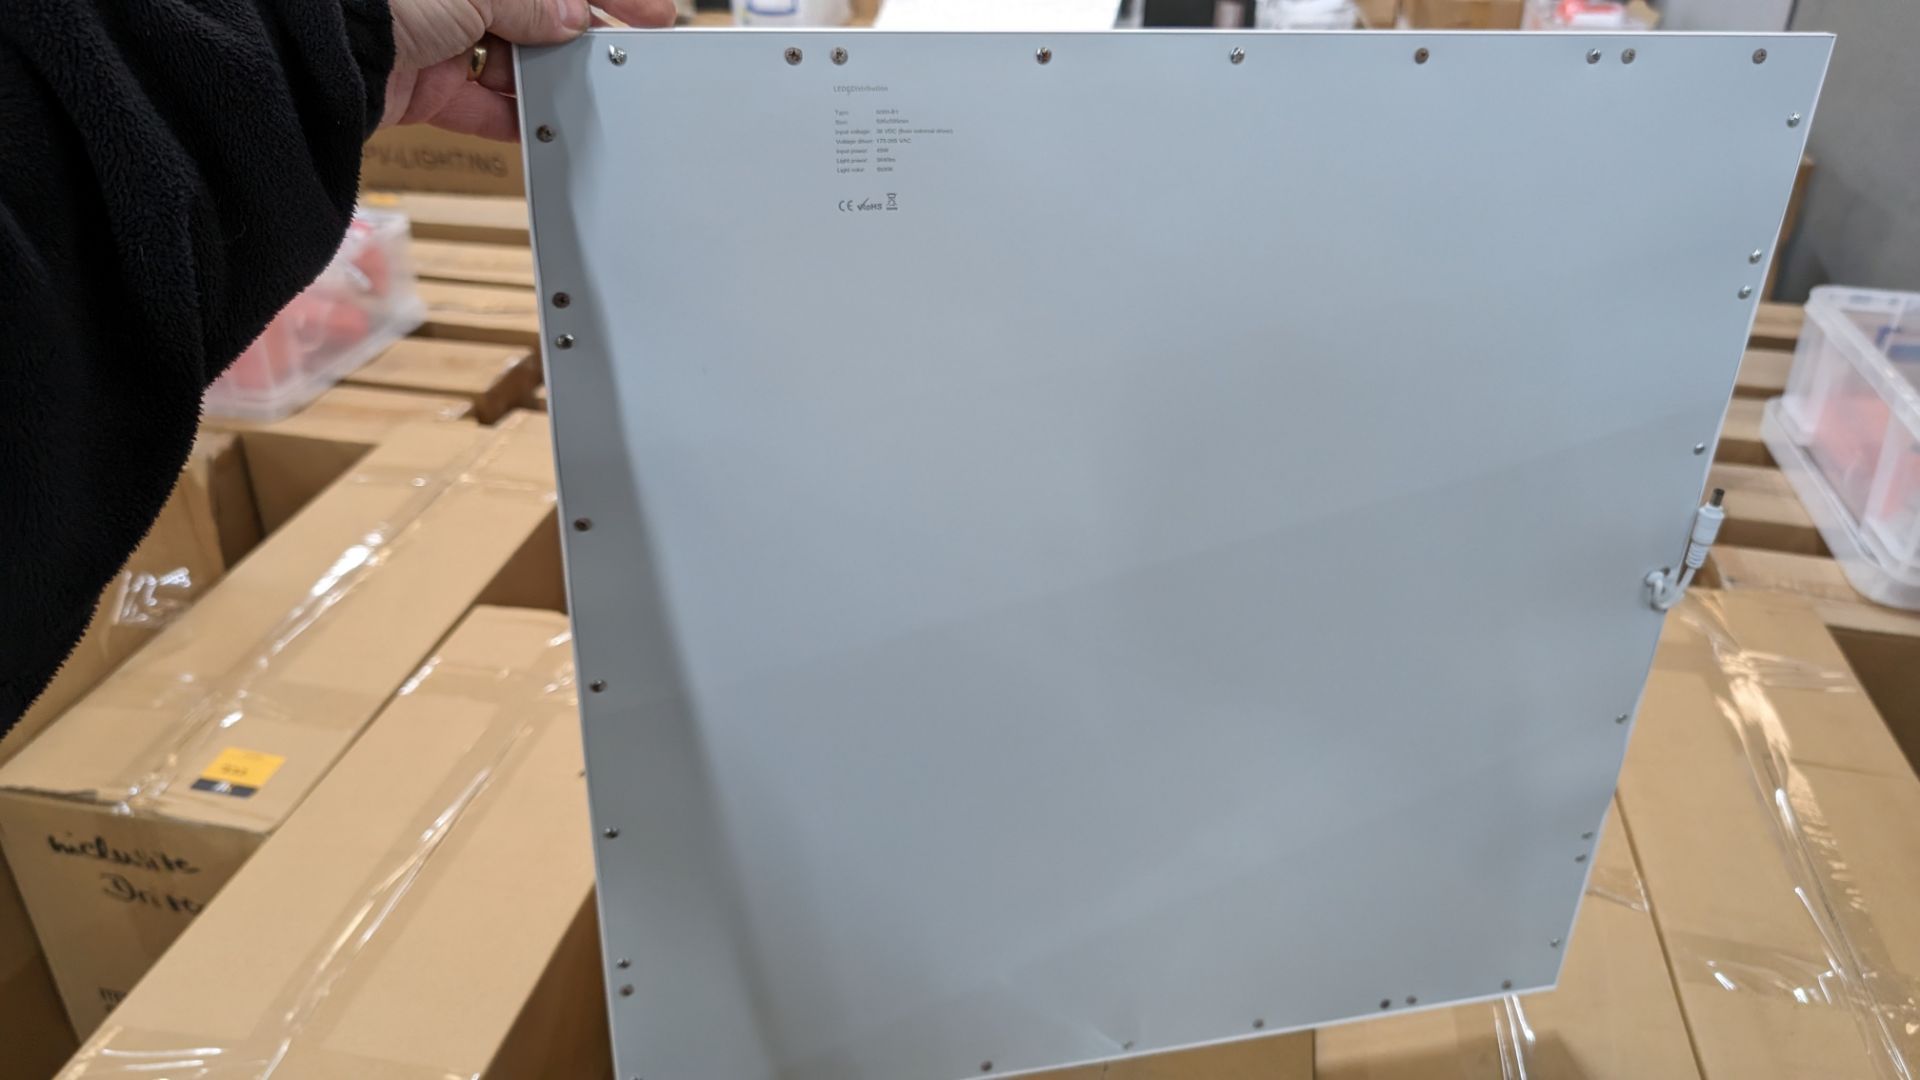 12 off 595mm x 595mm 5500k 45w LED lighting panels, each including driver - 1 carton - Image 4 of 5